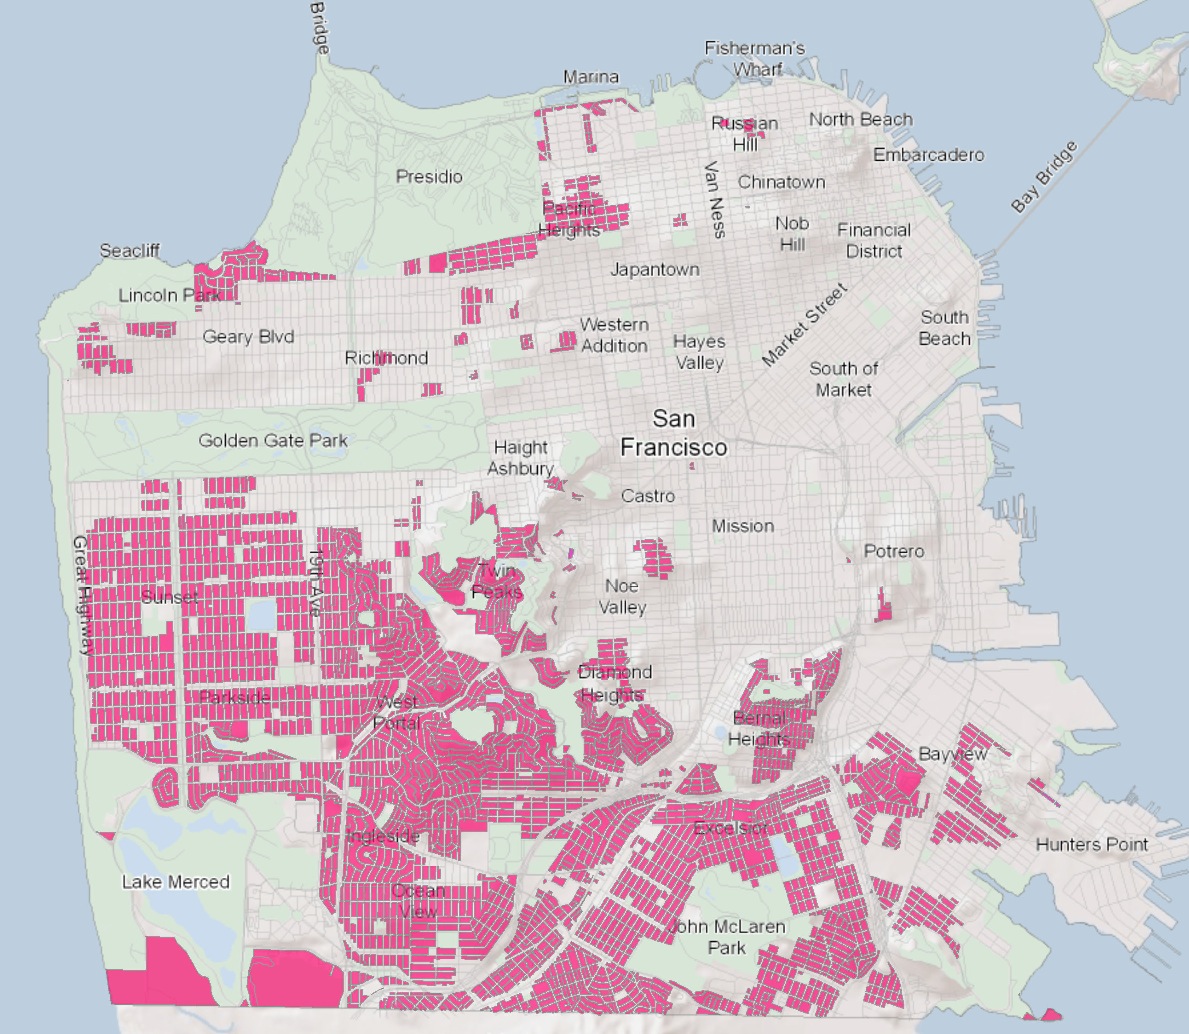 Single-family home zoning in San Francisco